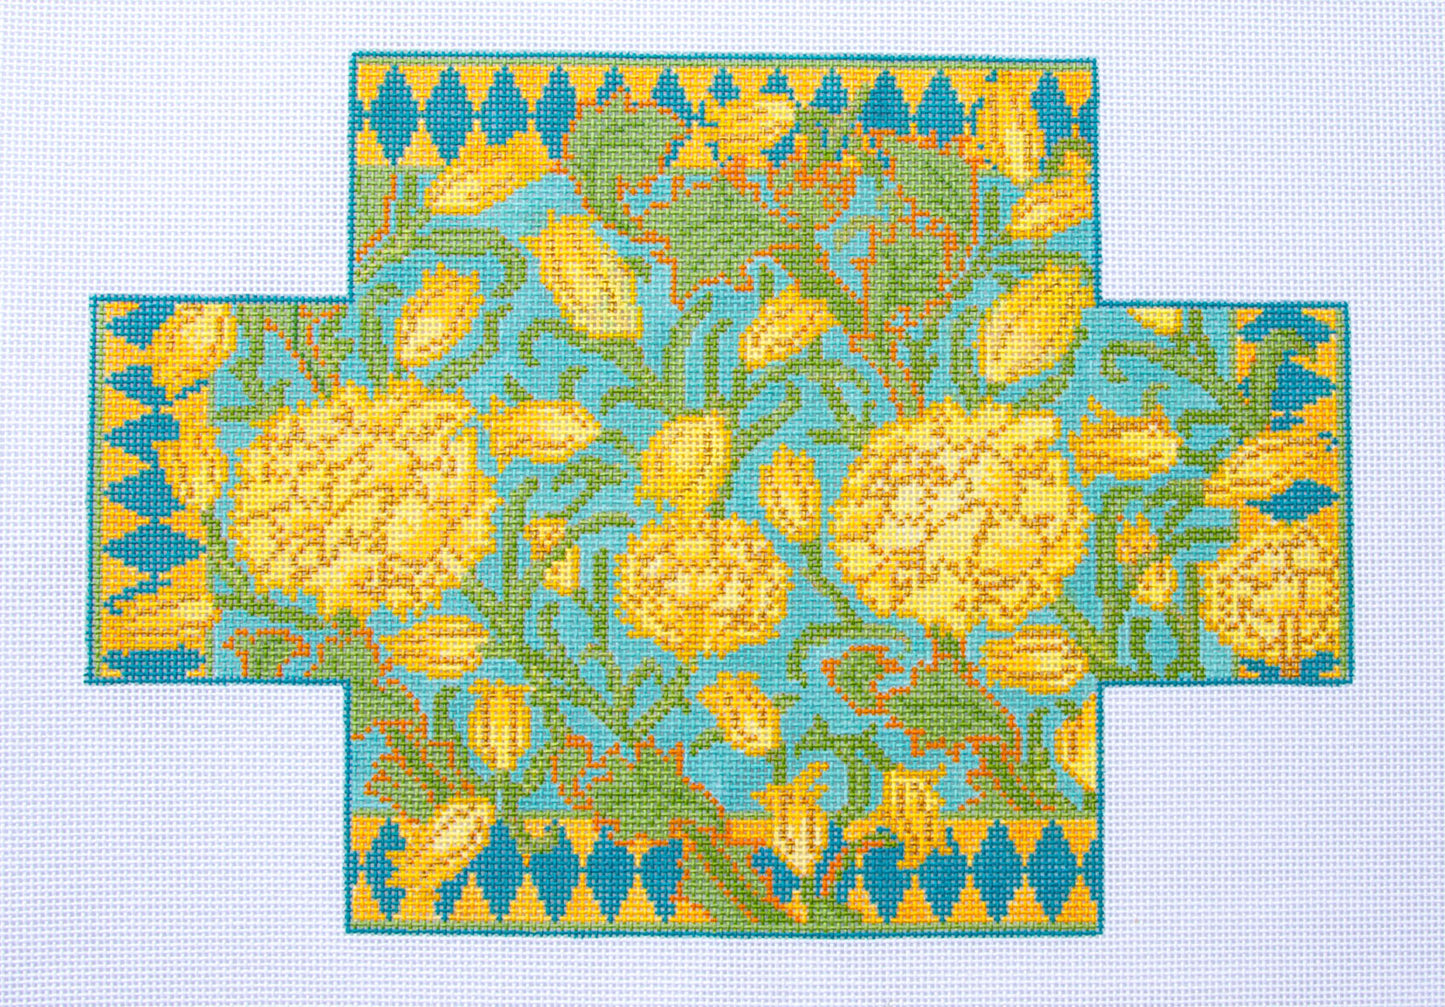 Brick Cover ~ William's Wild Tulips Doorstop in Yellow and Blue 13M handpainted Needlepoint Canvas~by Whimsy and Grace